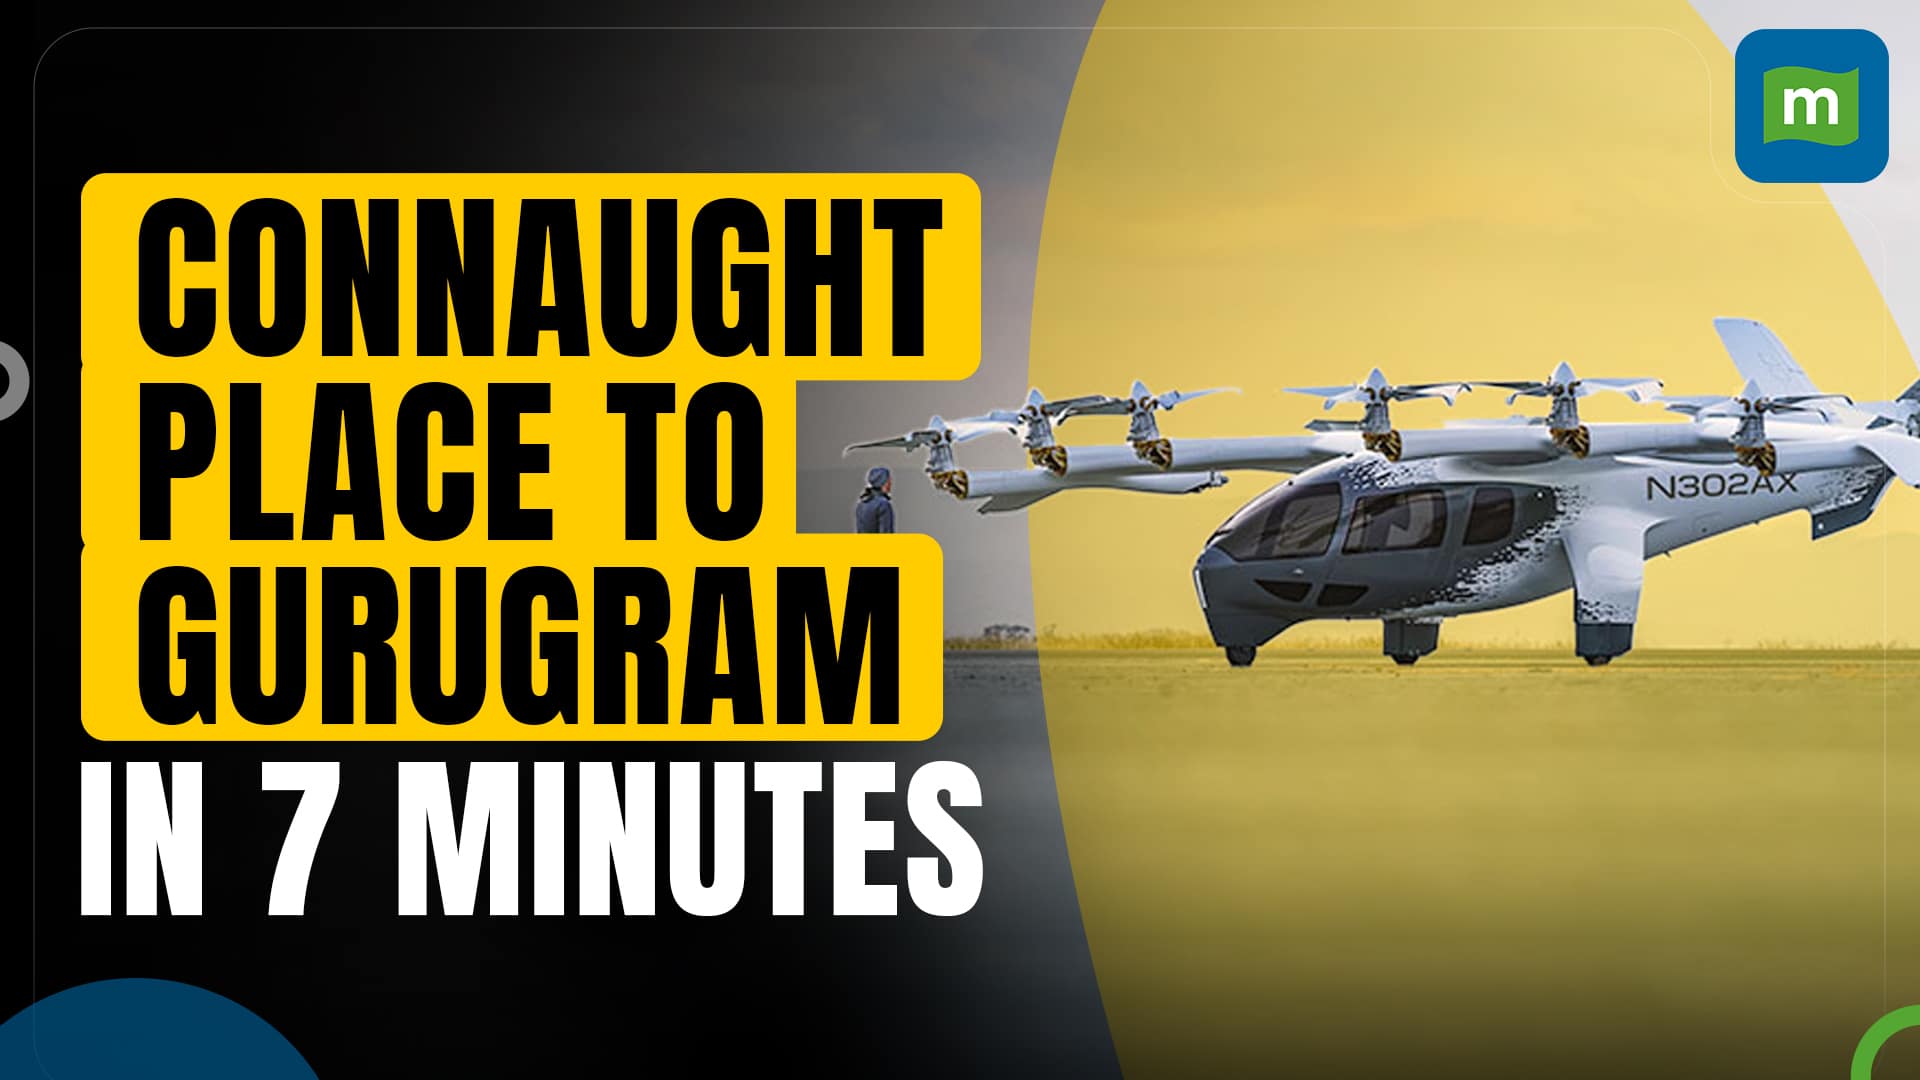 India's first Electric Air Taxi | Travel from Connaught Place to Gurugram in 7 minutes